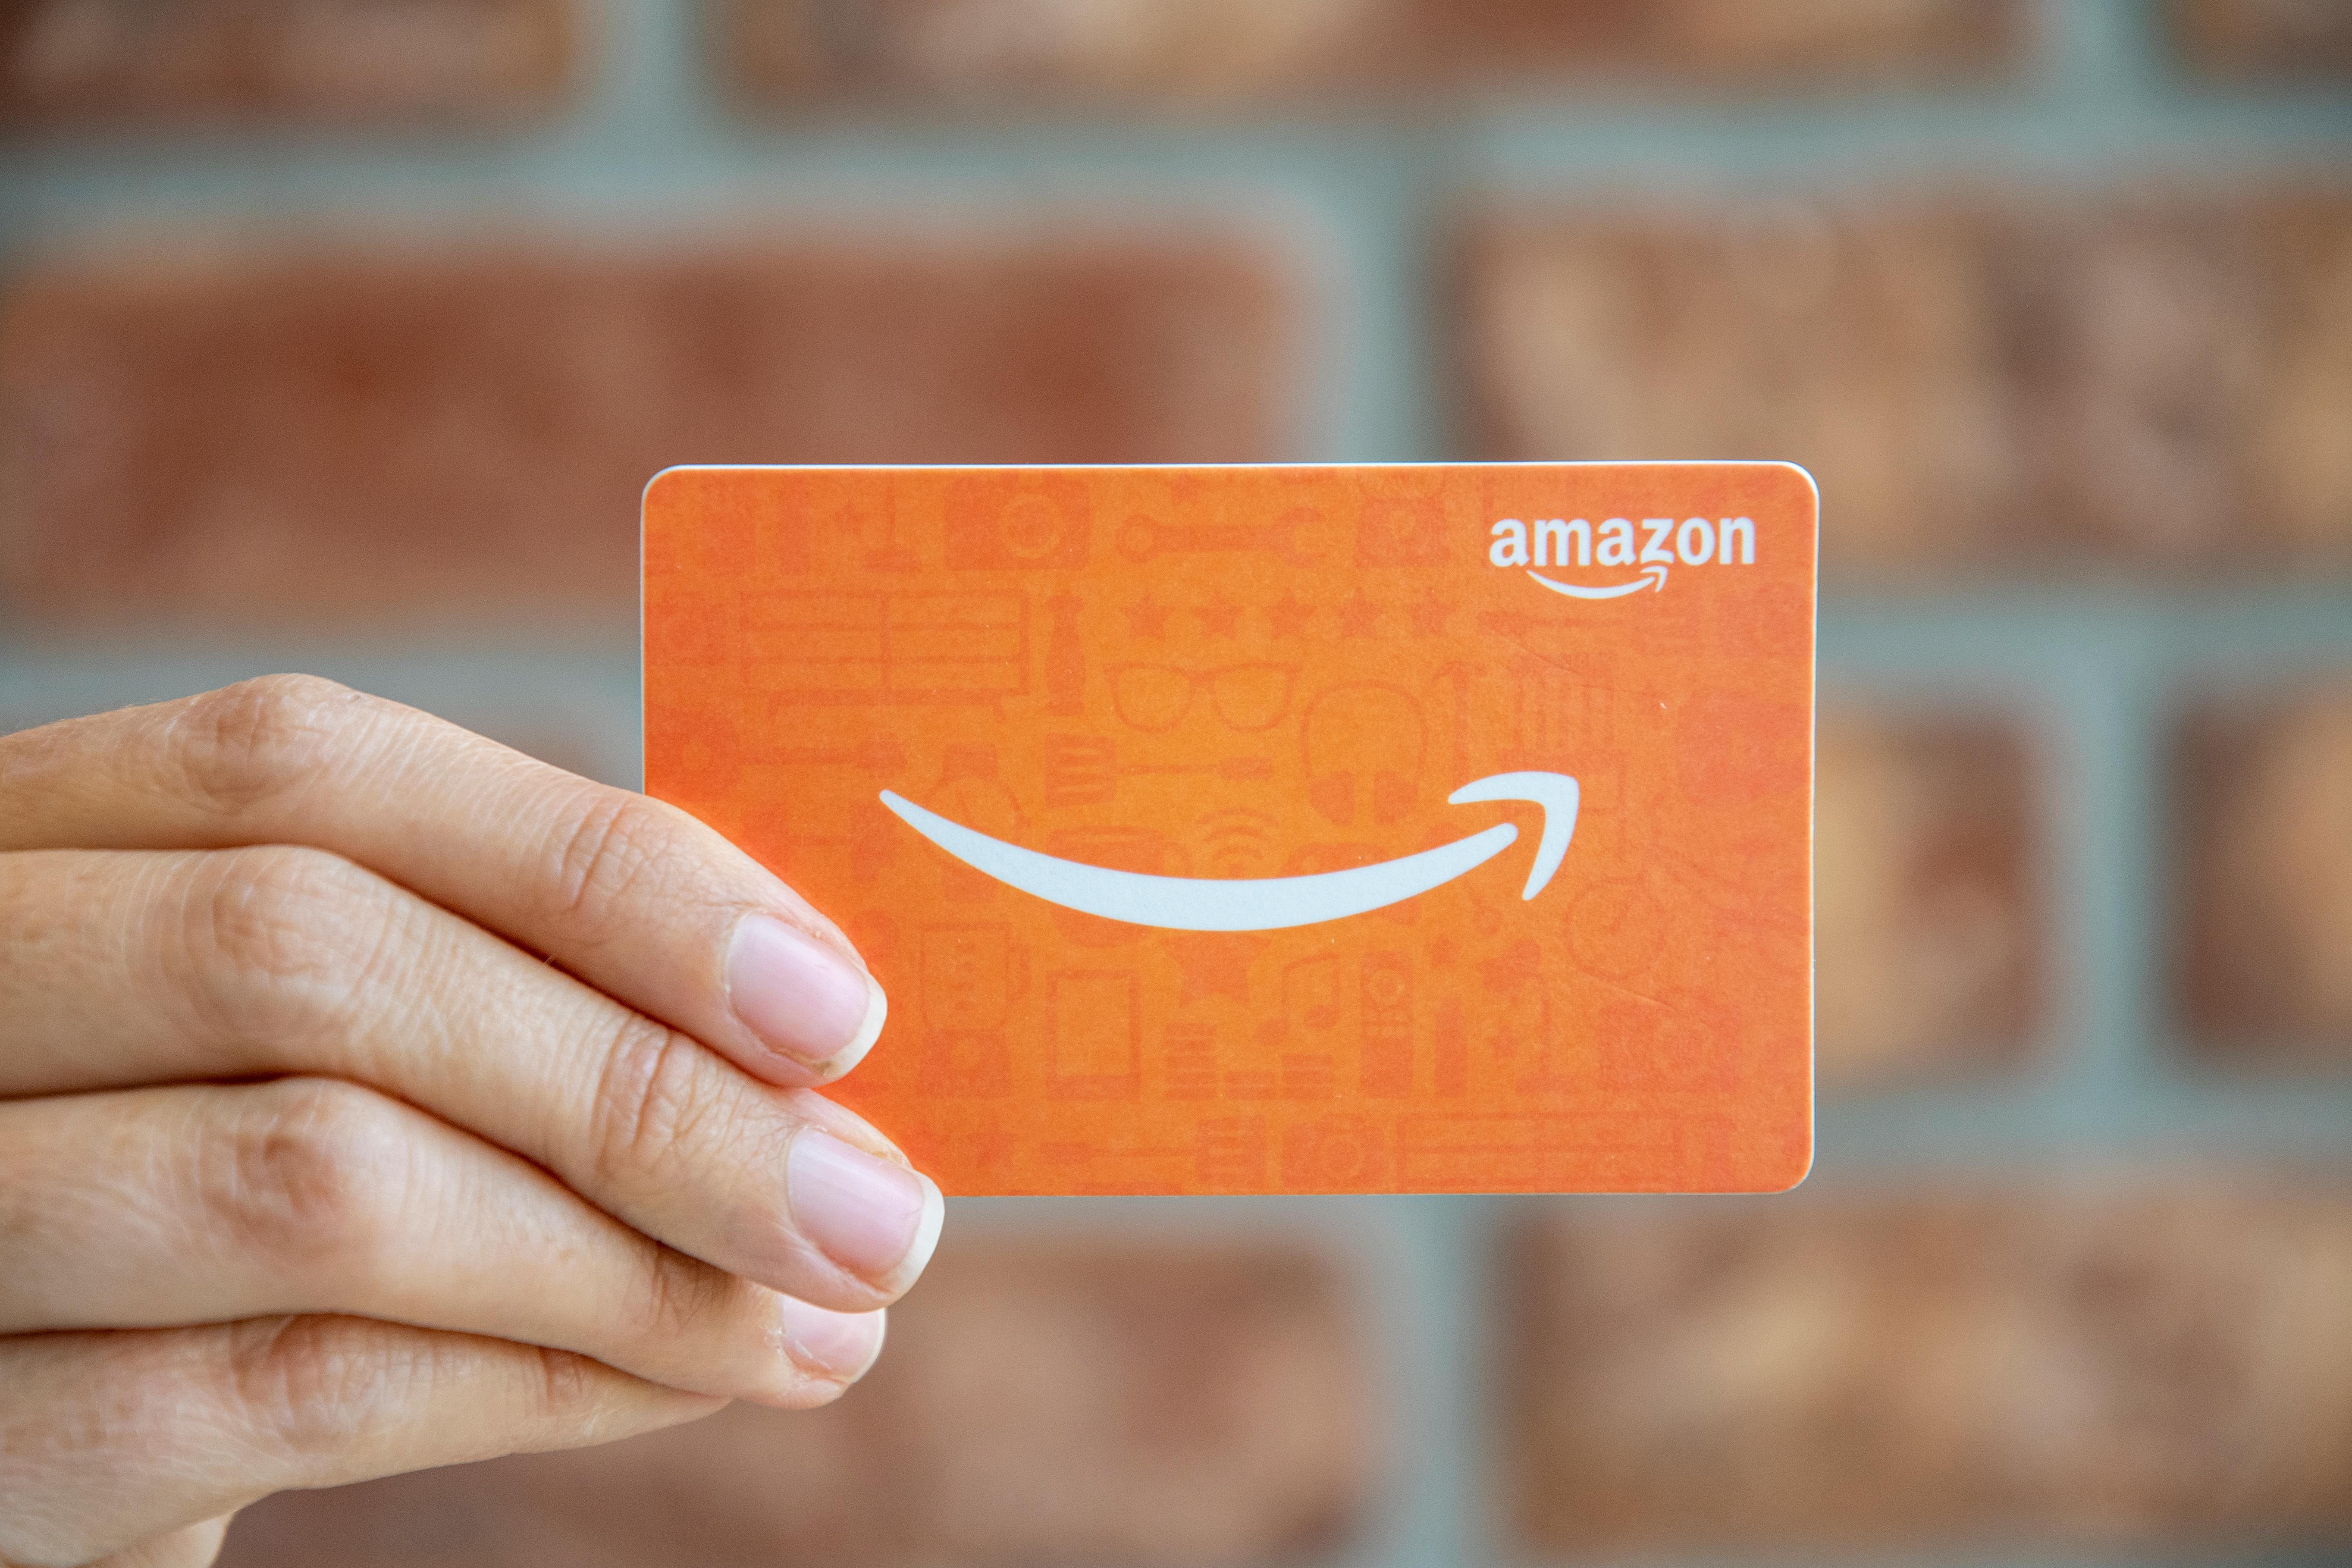 A person's hand holding up an Amazon gift card in front of a brick wall.